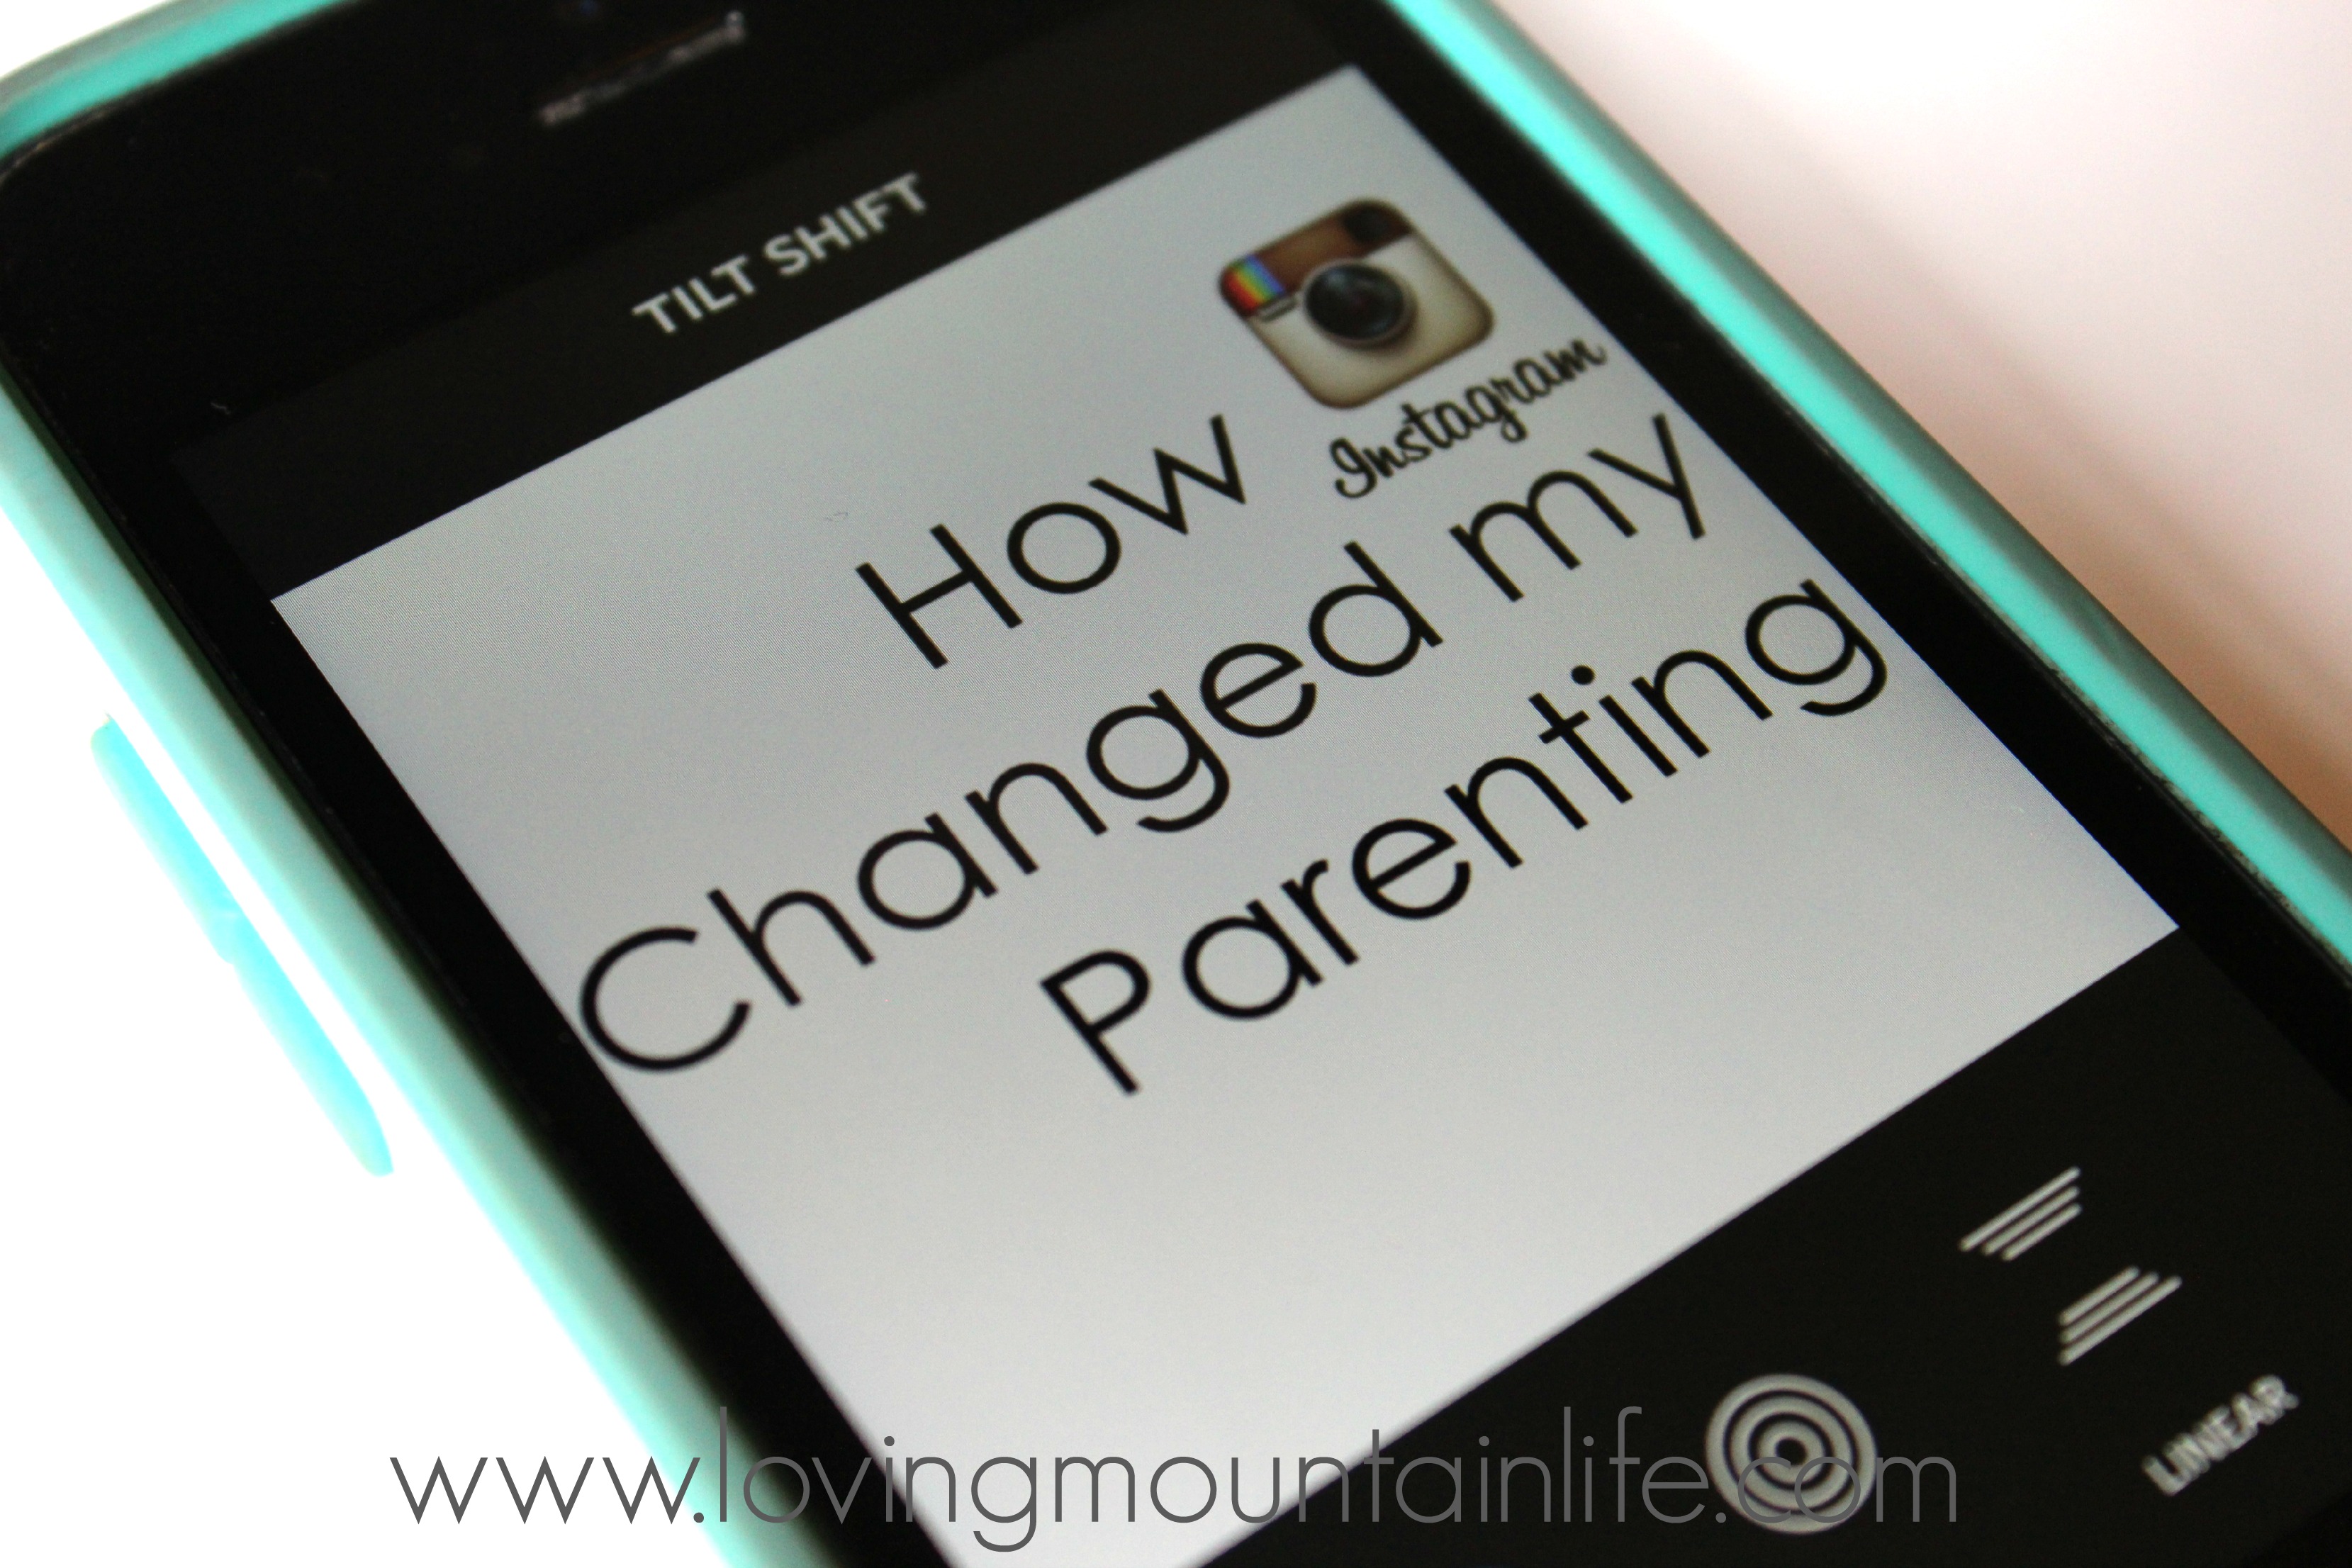 How Instagram changed this young mom's view on parenting